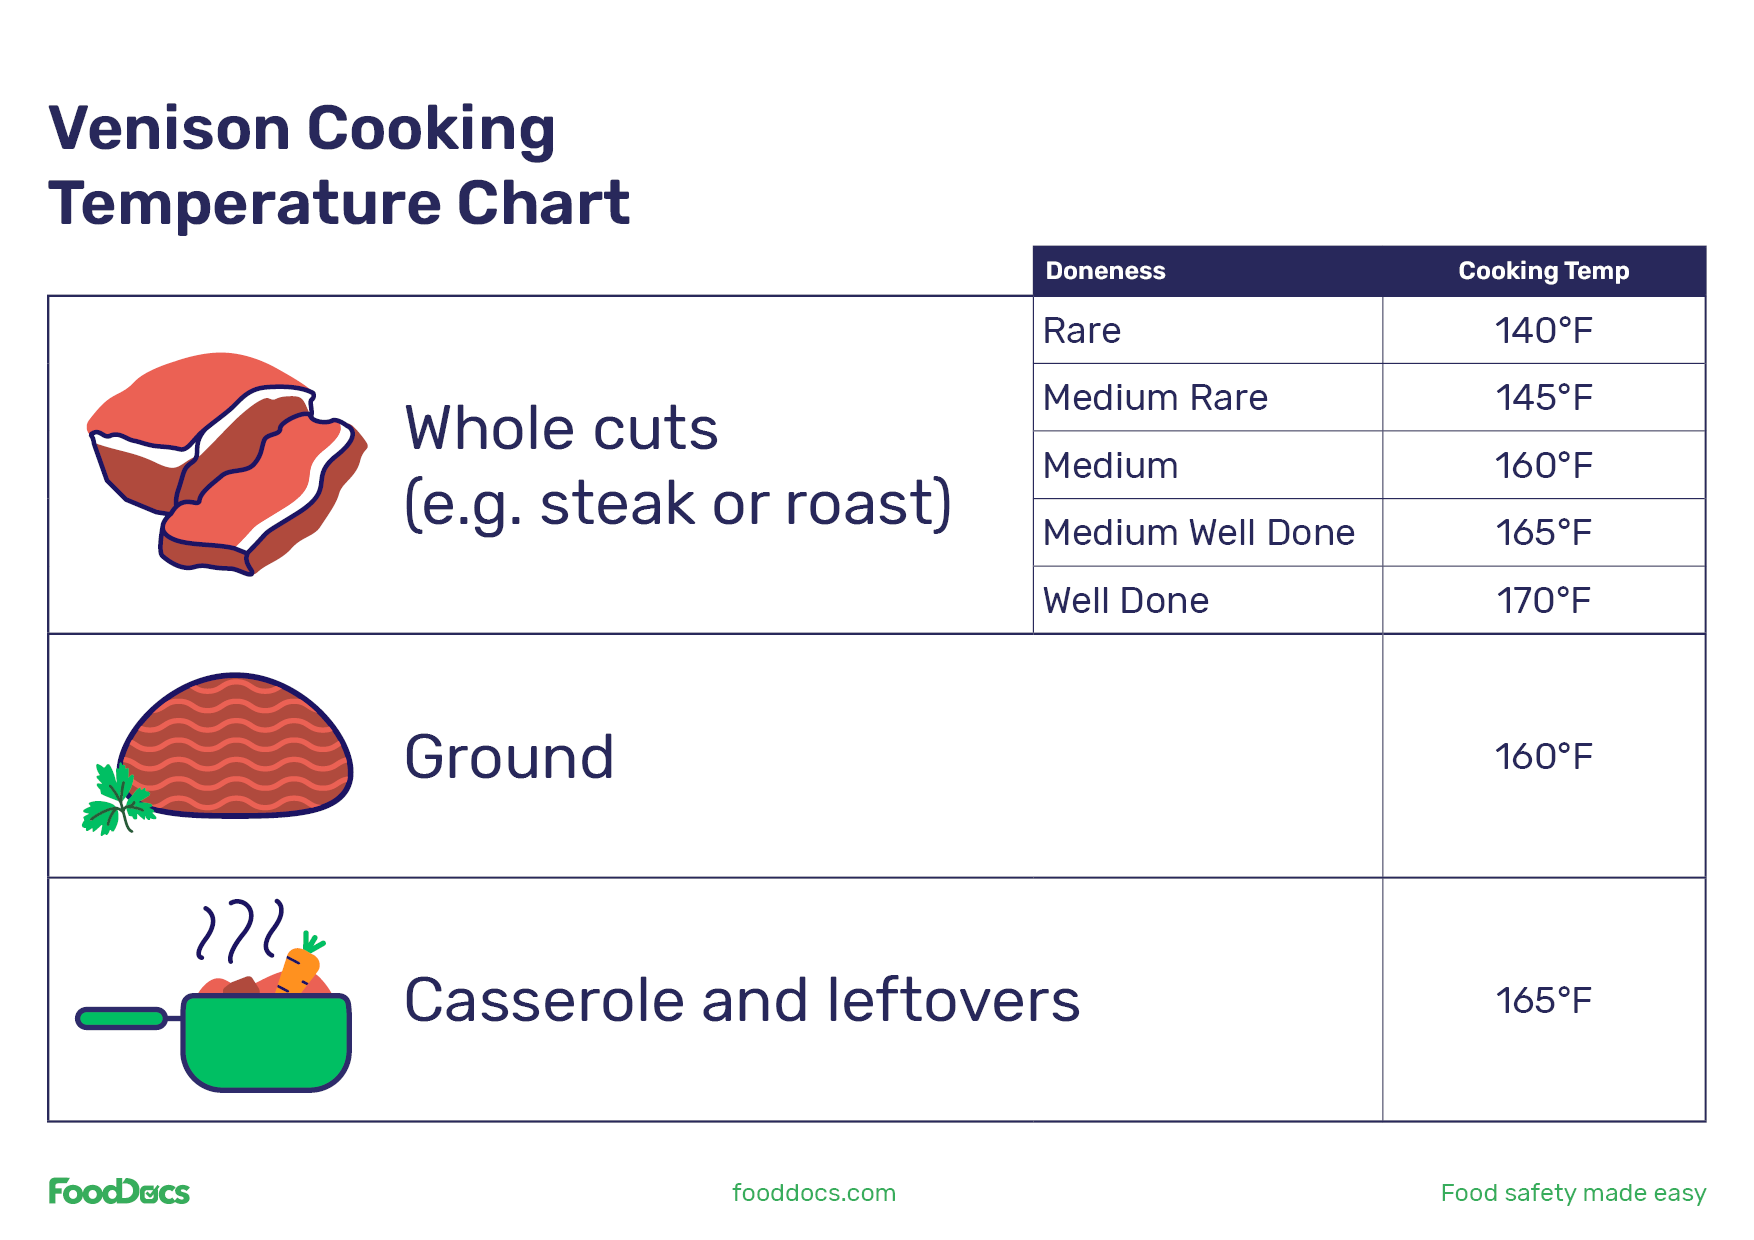 Venison cooking temperature chart | Download Free Template